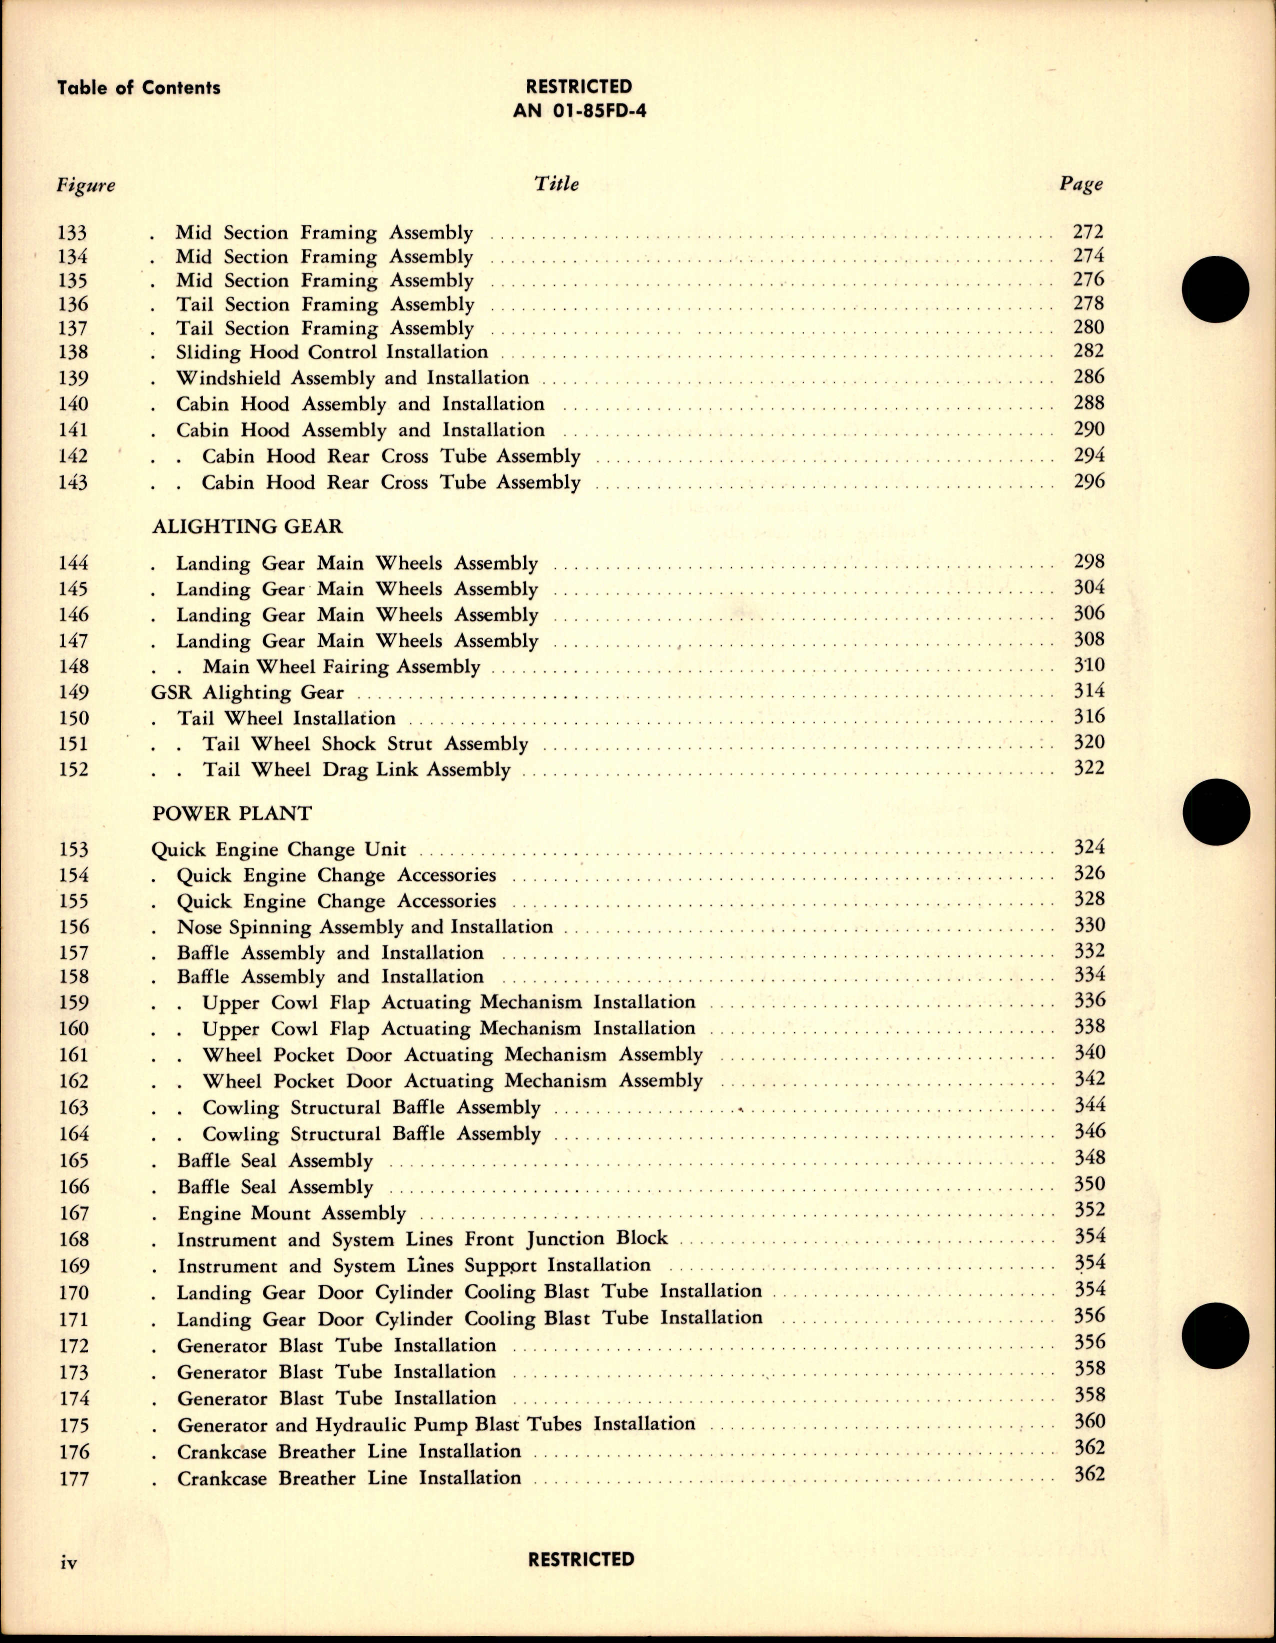 Sample page 8 from AirCorps Library document: Parts Catalog for Navy Models F8F-1, F8F-1B, F8F-1N, F8F-2, F8F-2N, F8F-2P